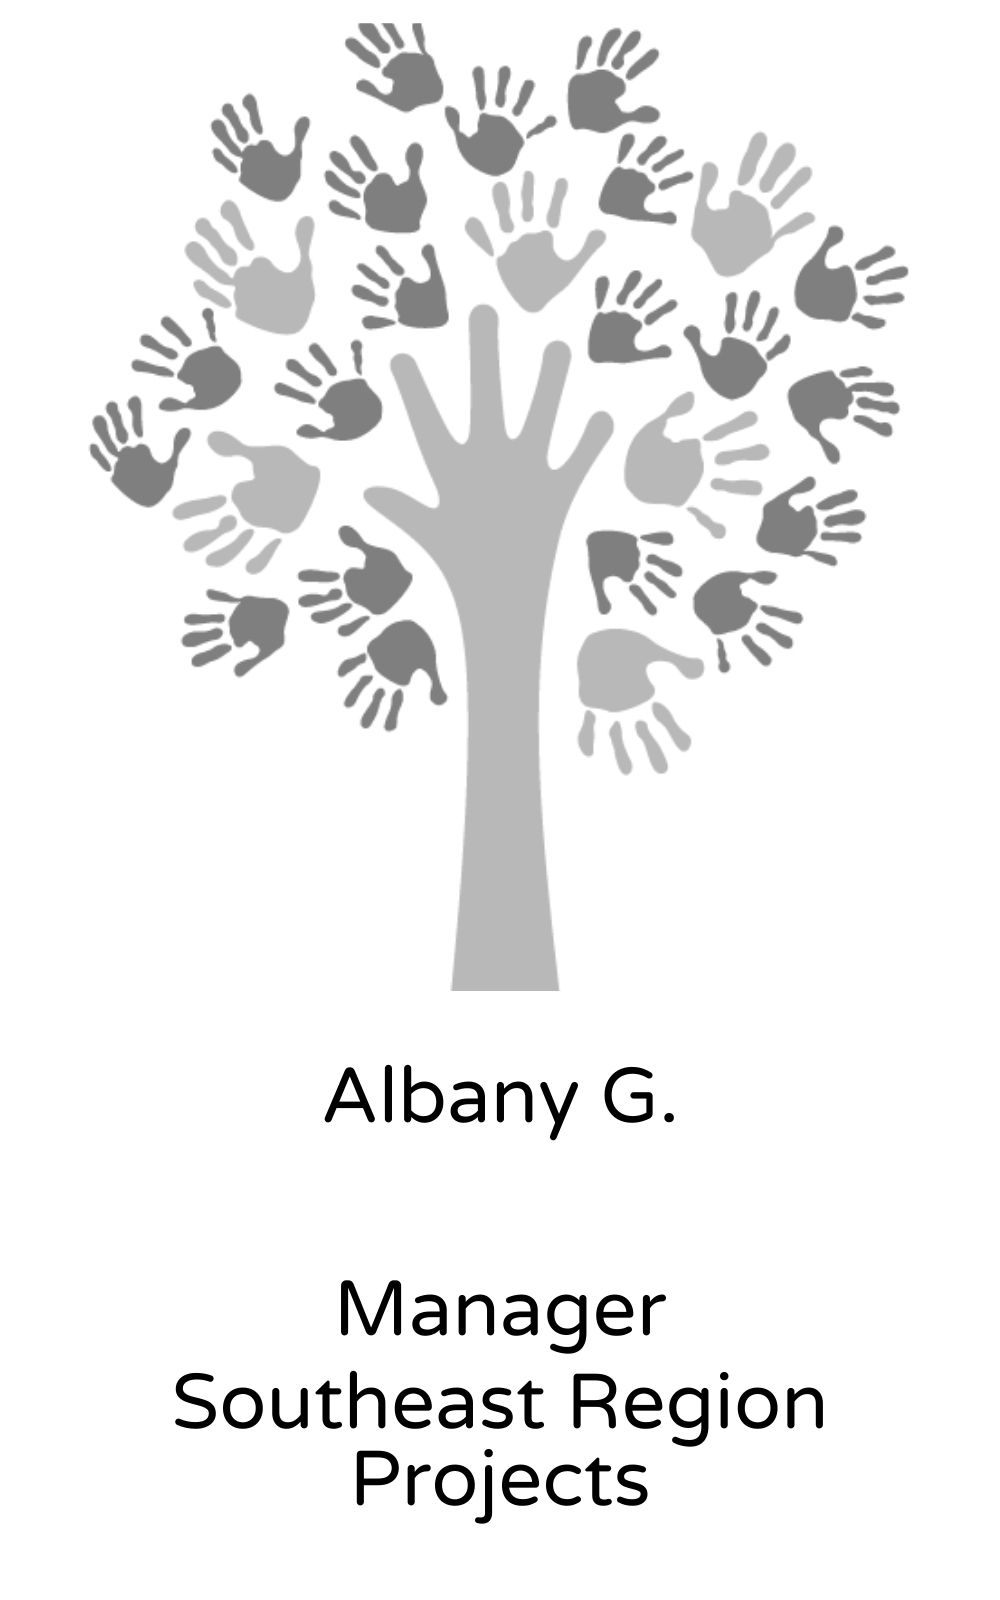 Albany G, Manager, Southeast Region Projects